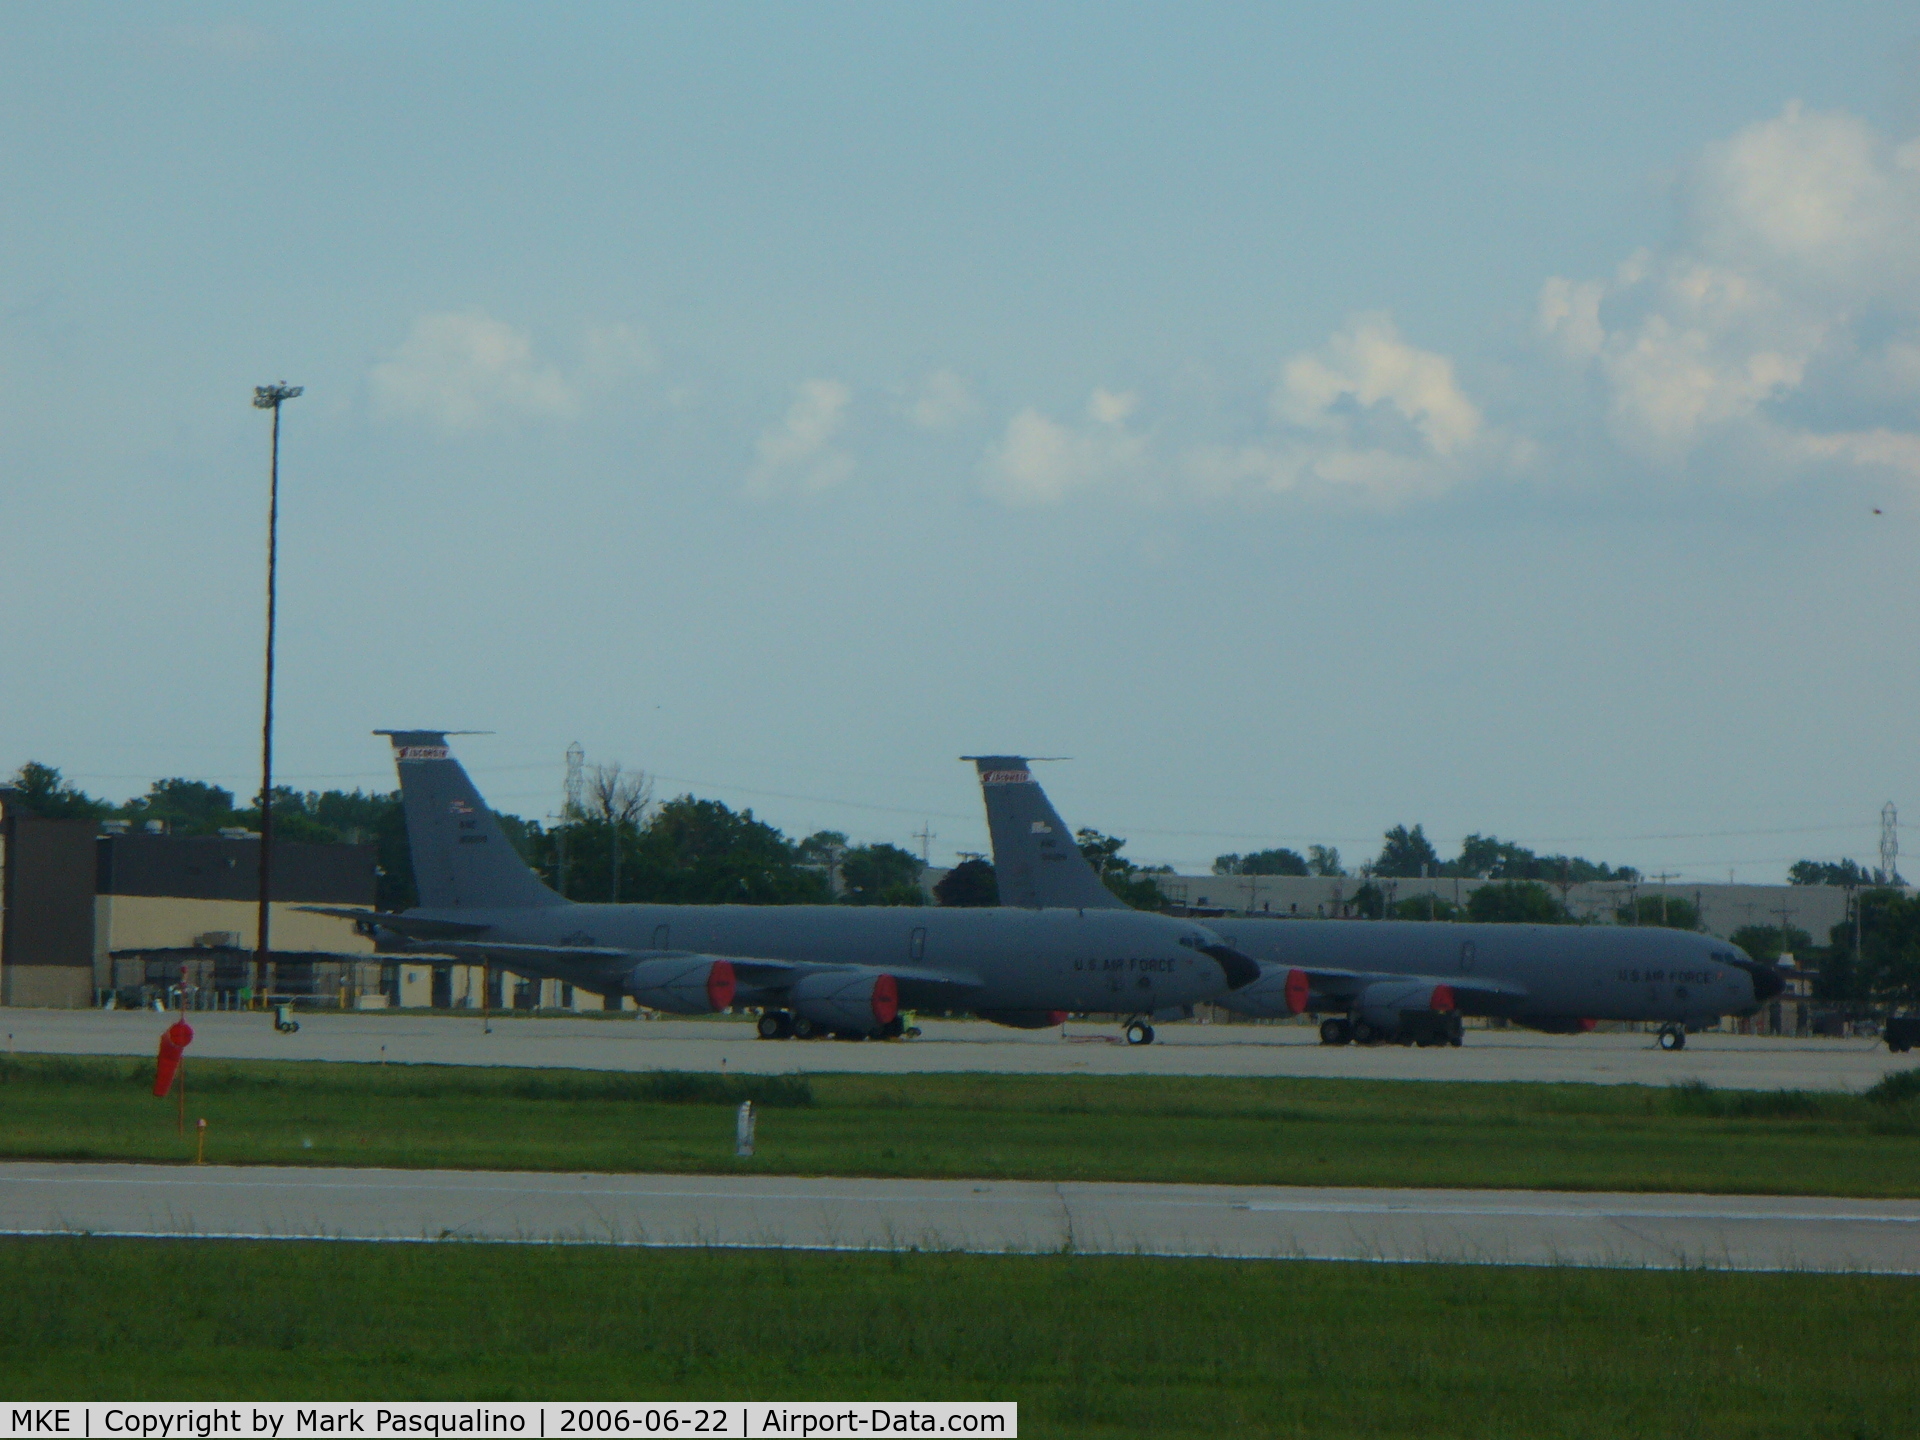 General Mitchell International Airport (MKE) - KC-135 aircraft parked on East Ramp